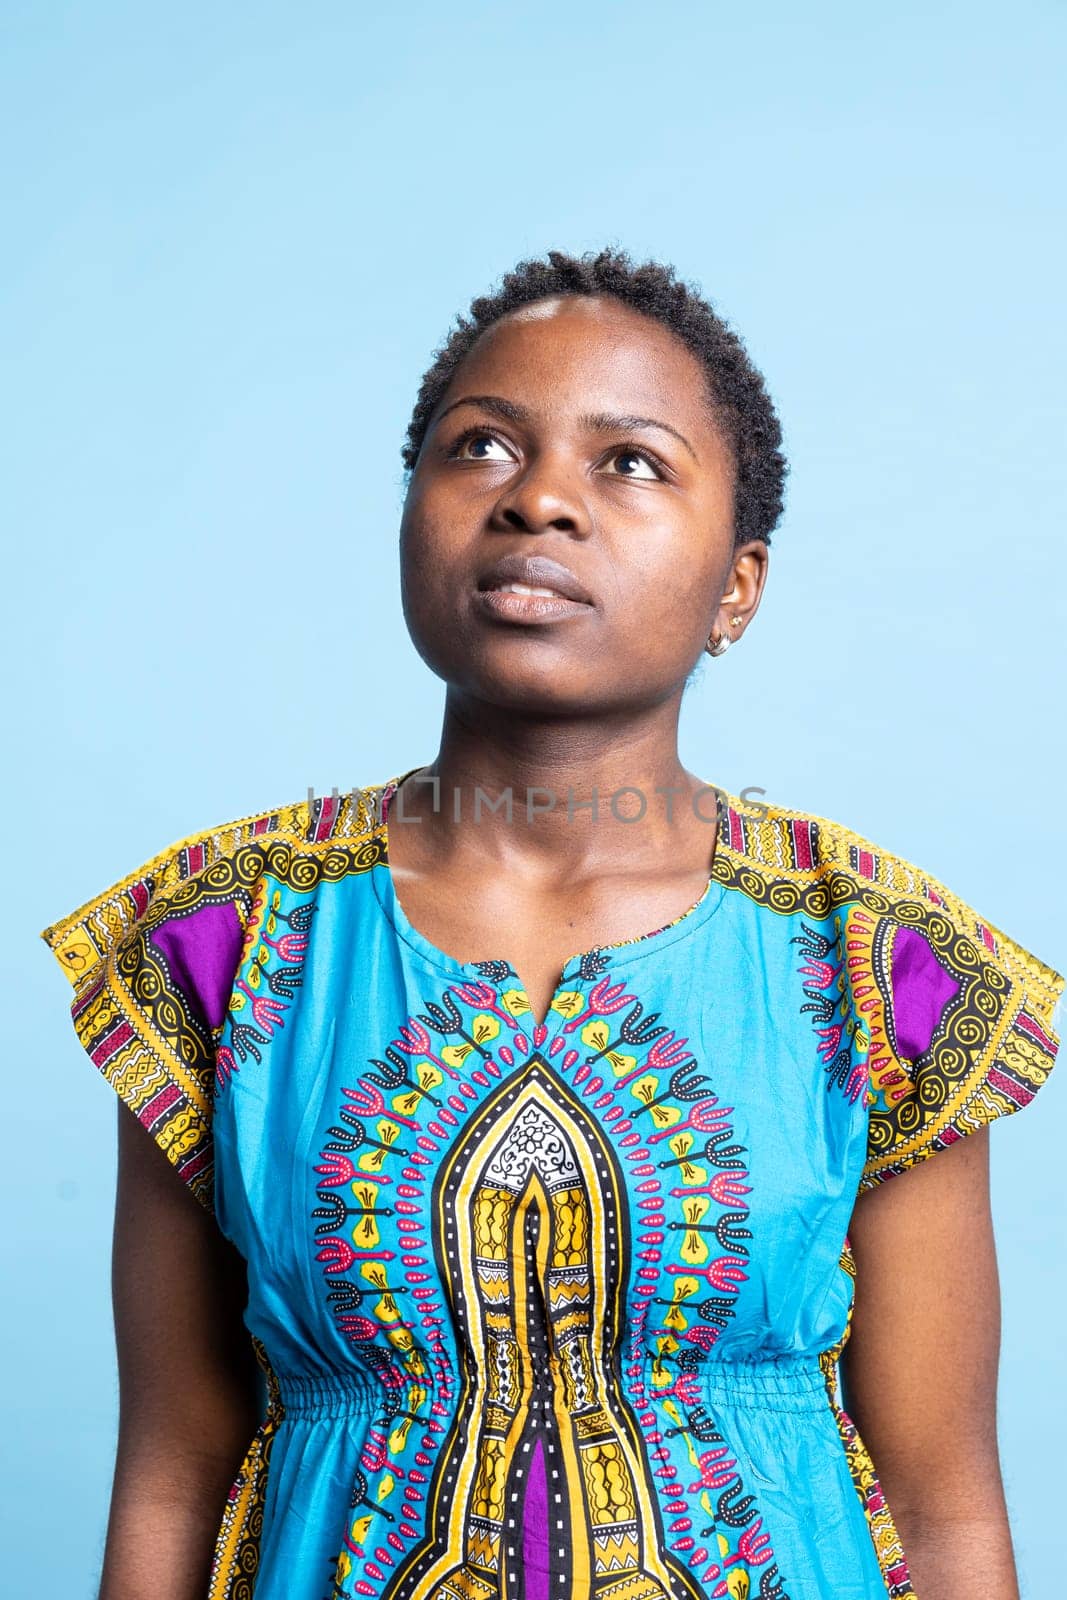 Portrait of serious person wearing traditional ethnic costume, woman posing on camera with confidence. African american girl looking gorgeous over blue background, feminine natural adult.